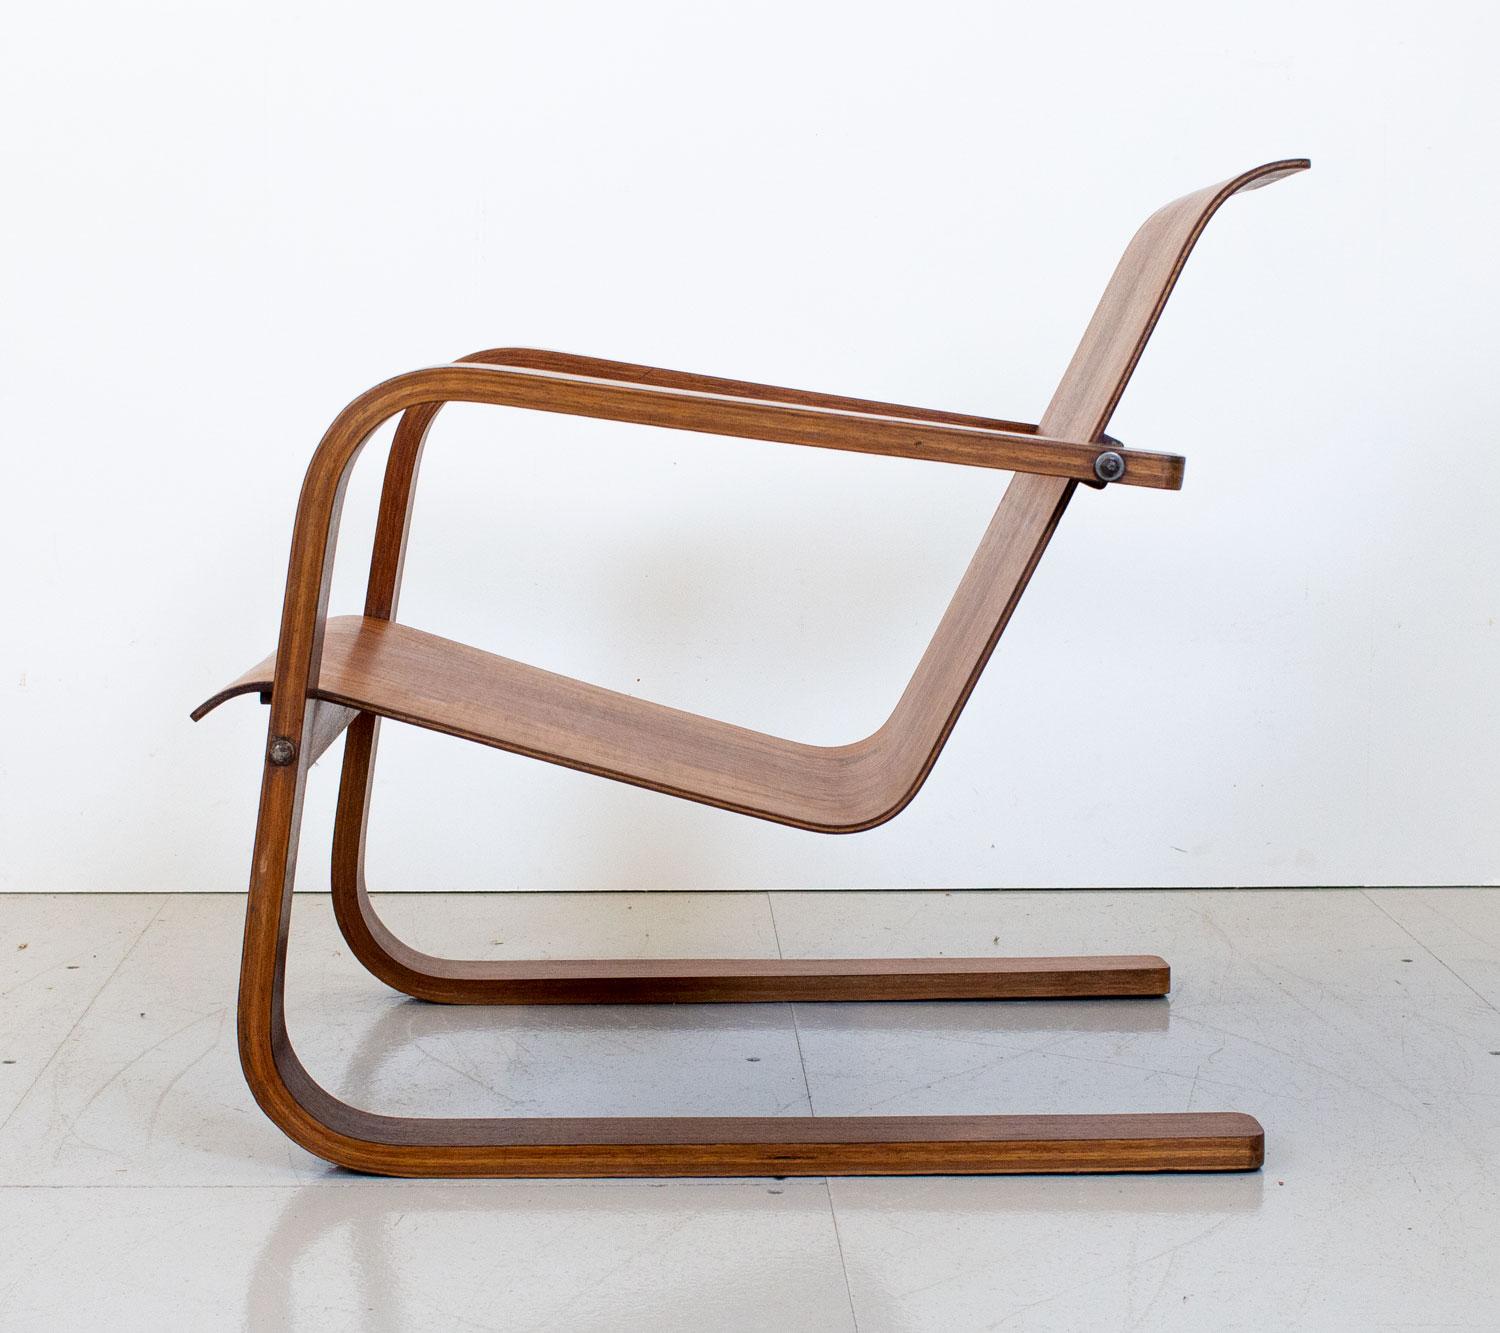 A rare 1930s modernist cantilever armchair very much in the style of Alvar Aalto and Marcel Breuer. This has been made using a walnut veneered plywood to create a strong but classic design with a hinged seat and sweeping curved armrests. The natural